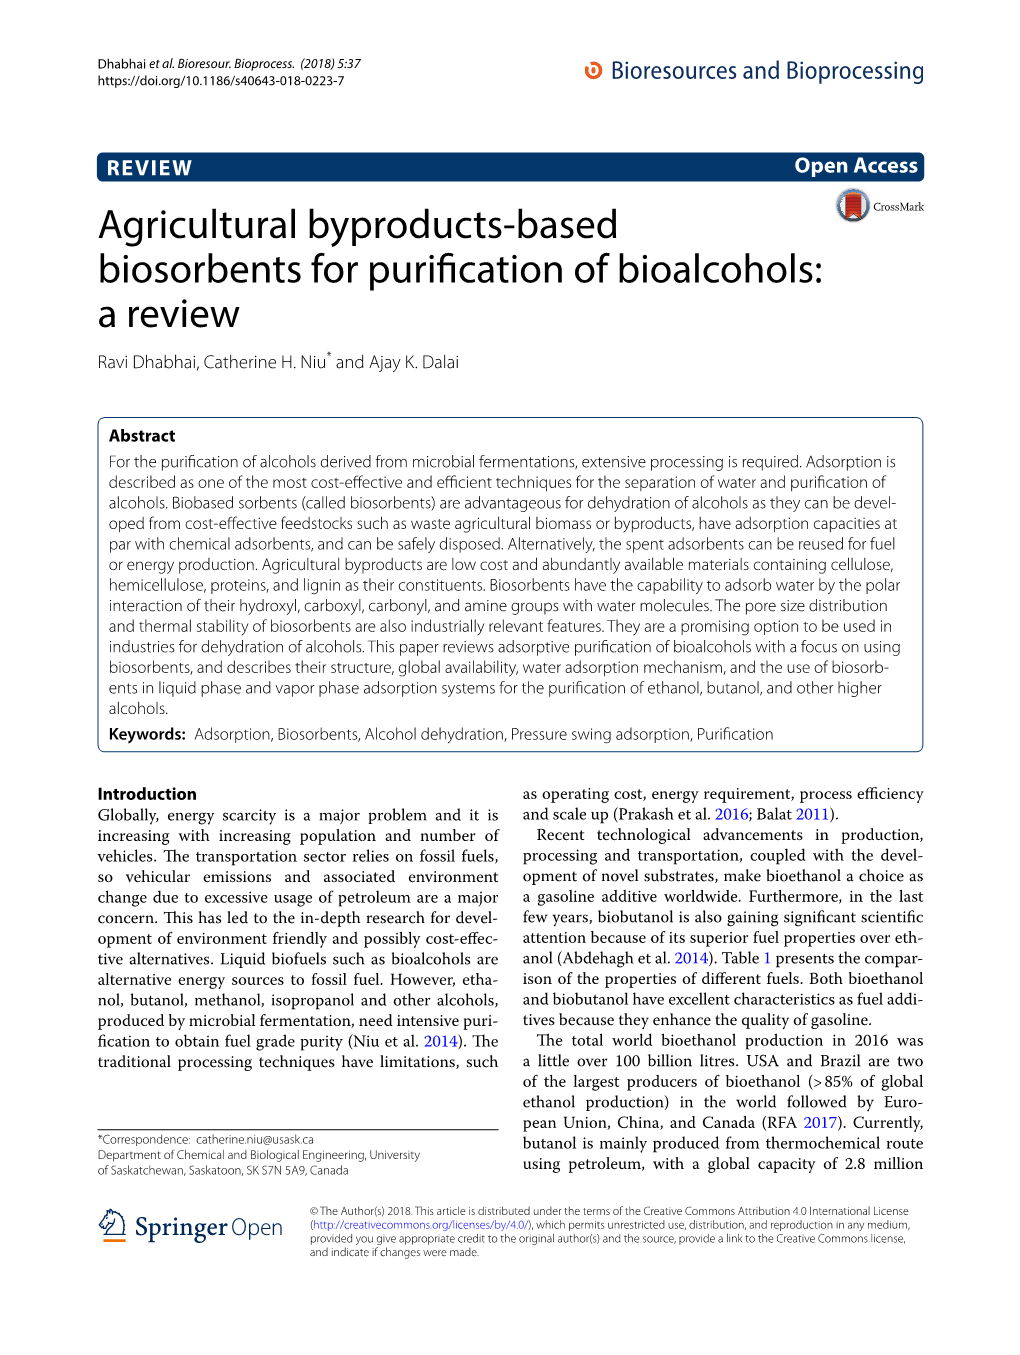 Agricultural Byproducts-Based Biosorbents for Purification Of